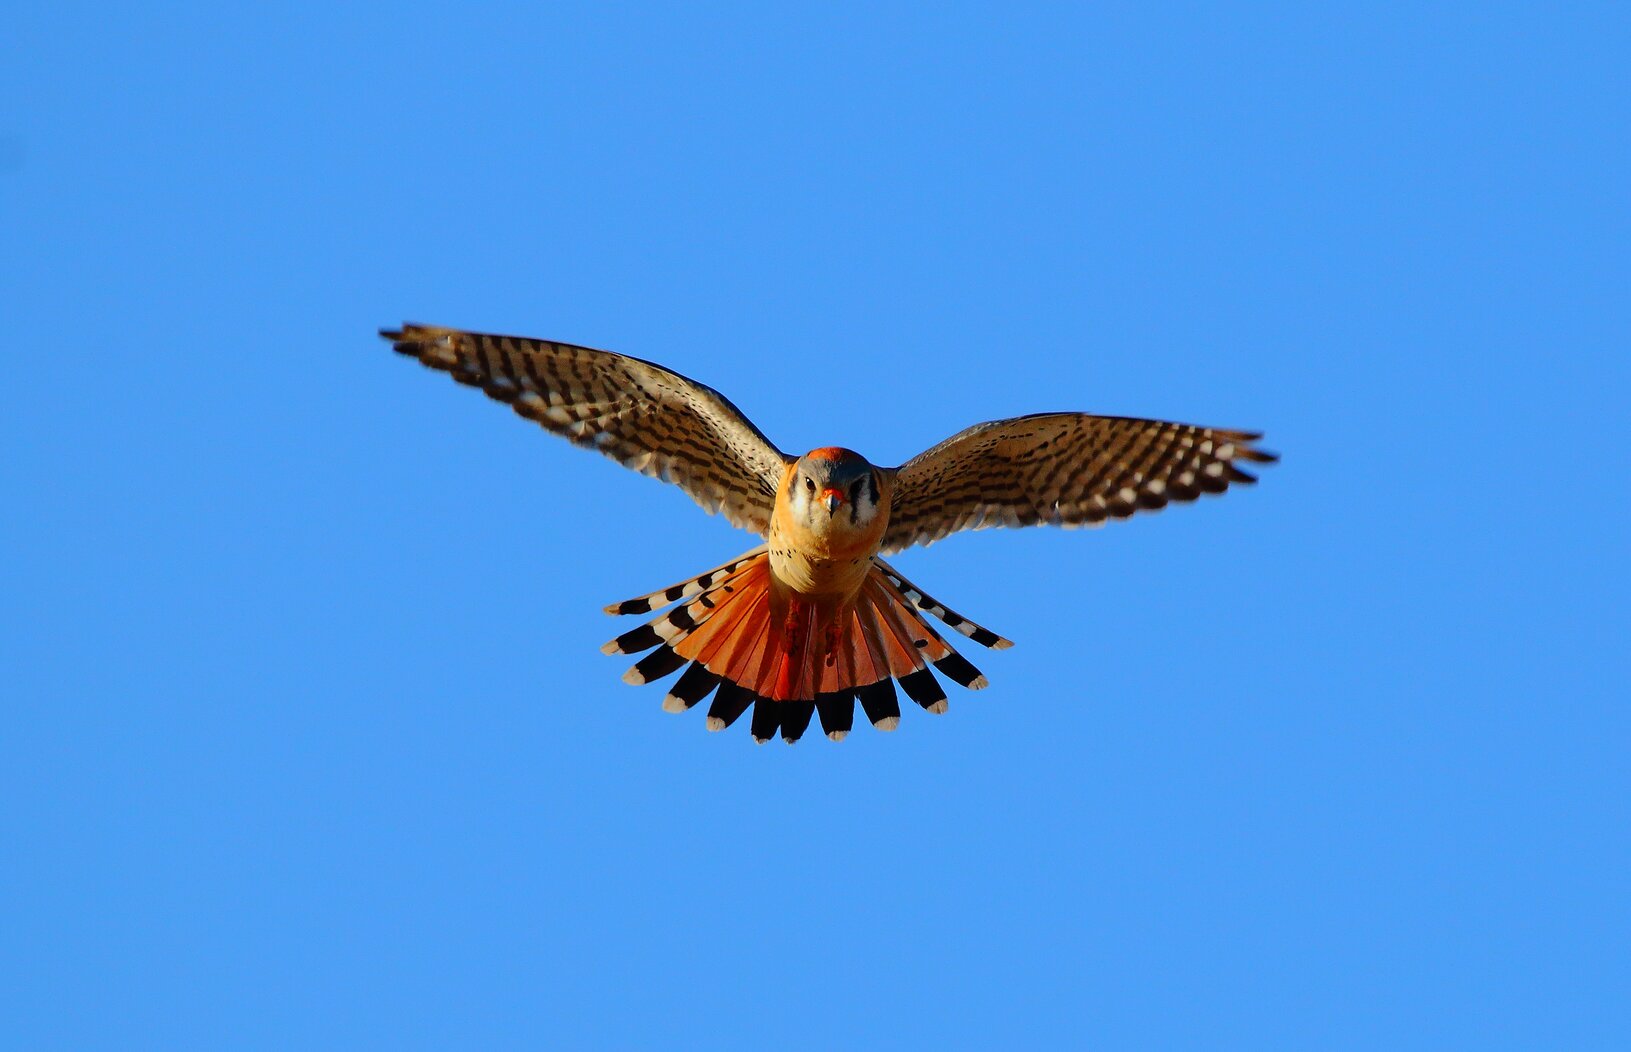 An American Kestrel hovers as it searches for prey. Photo: Isaac Grant